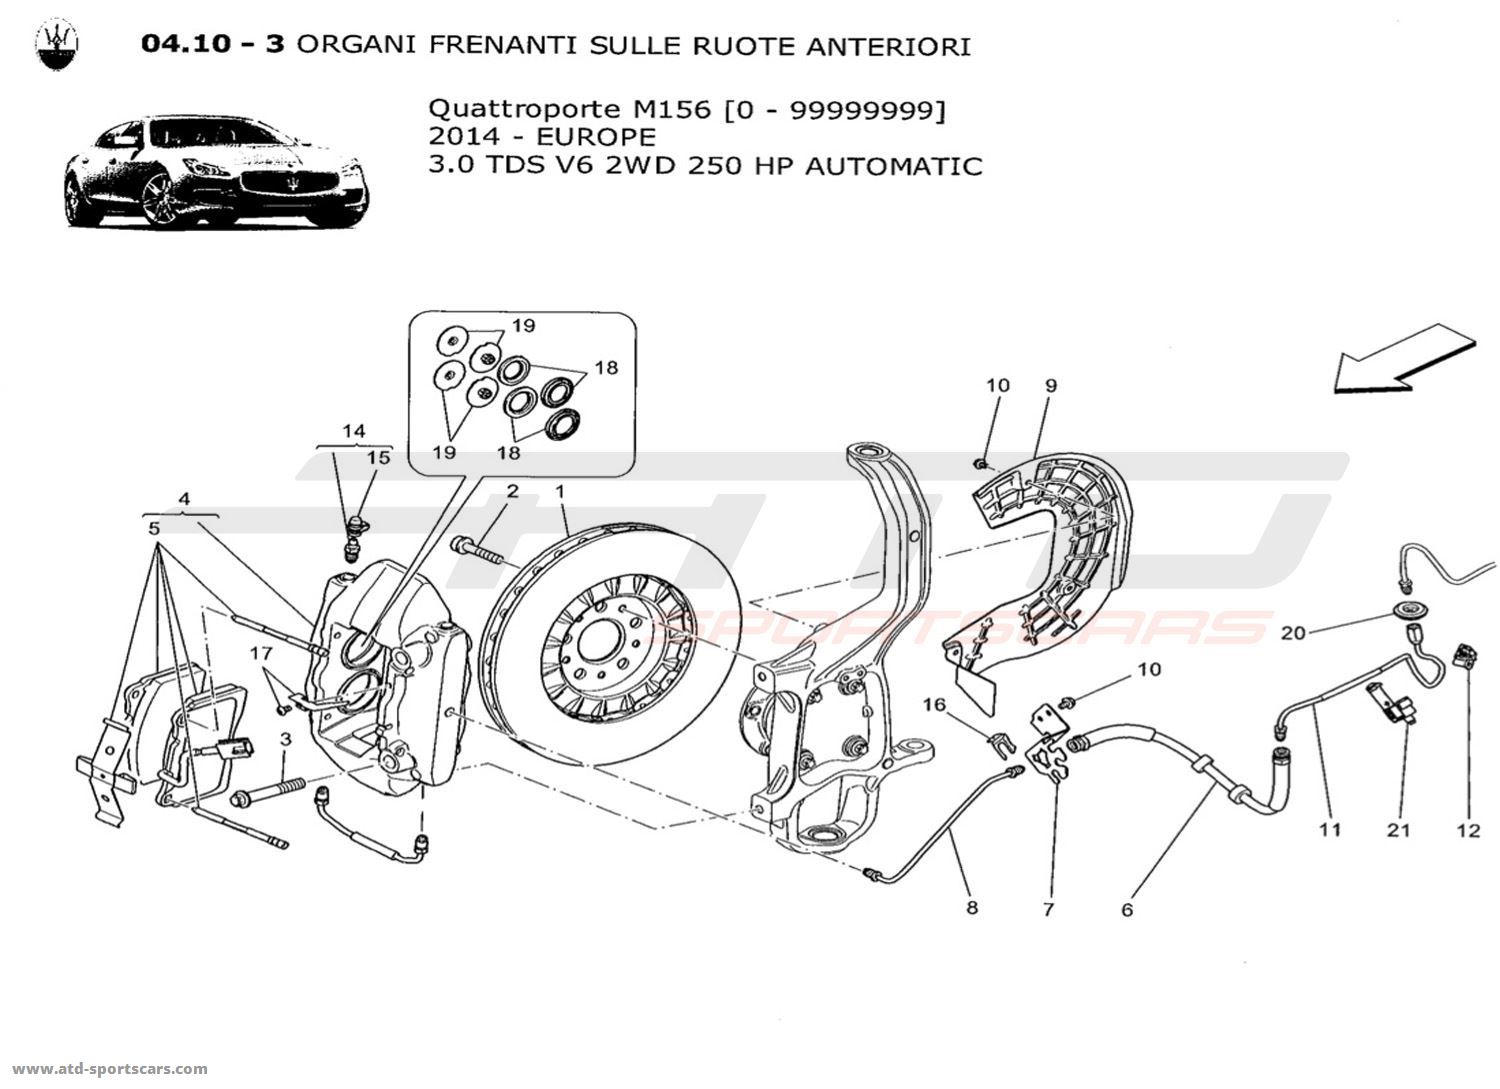 BRAKING DEVICES ON FRONT WHEELS